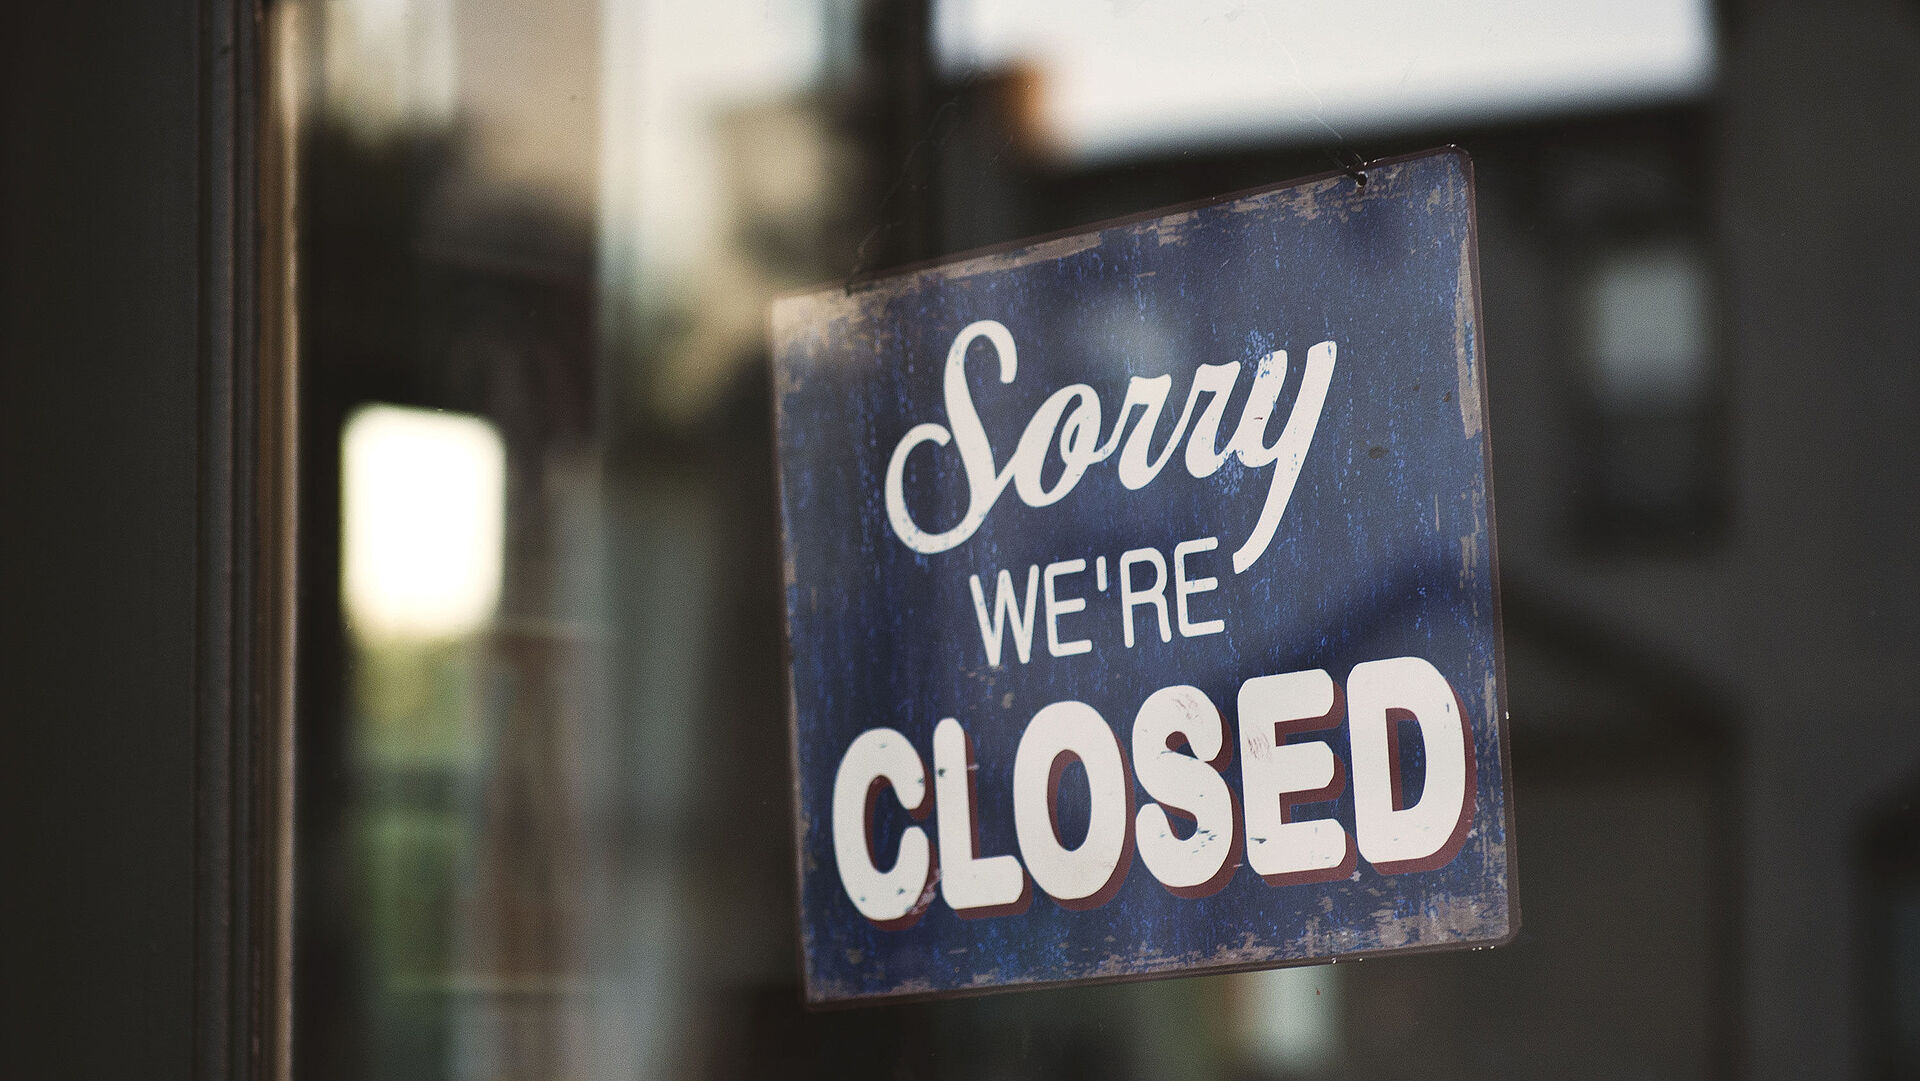 Closeup shot of a sign that says "Sorry We're Closed" hanging on a glass door